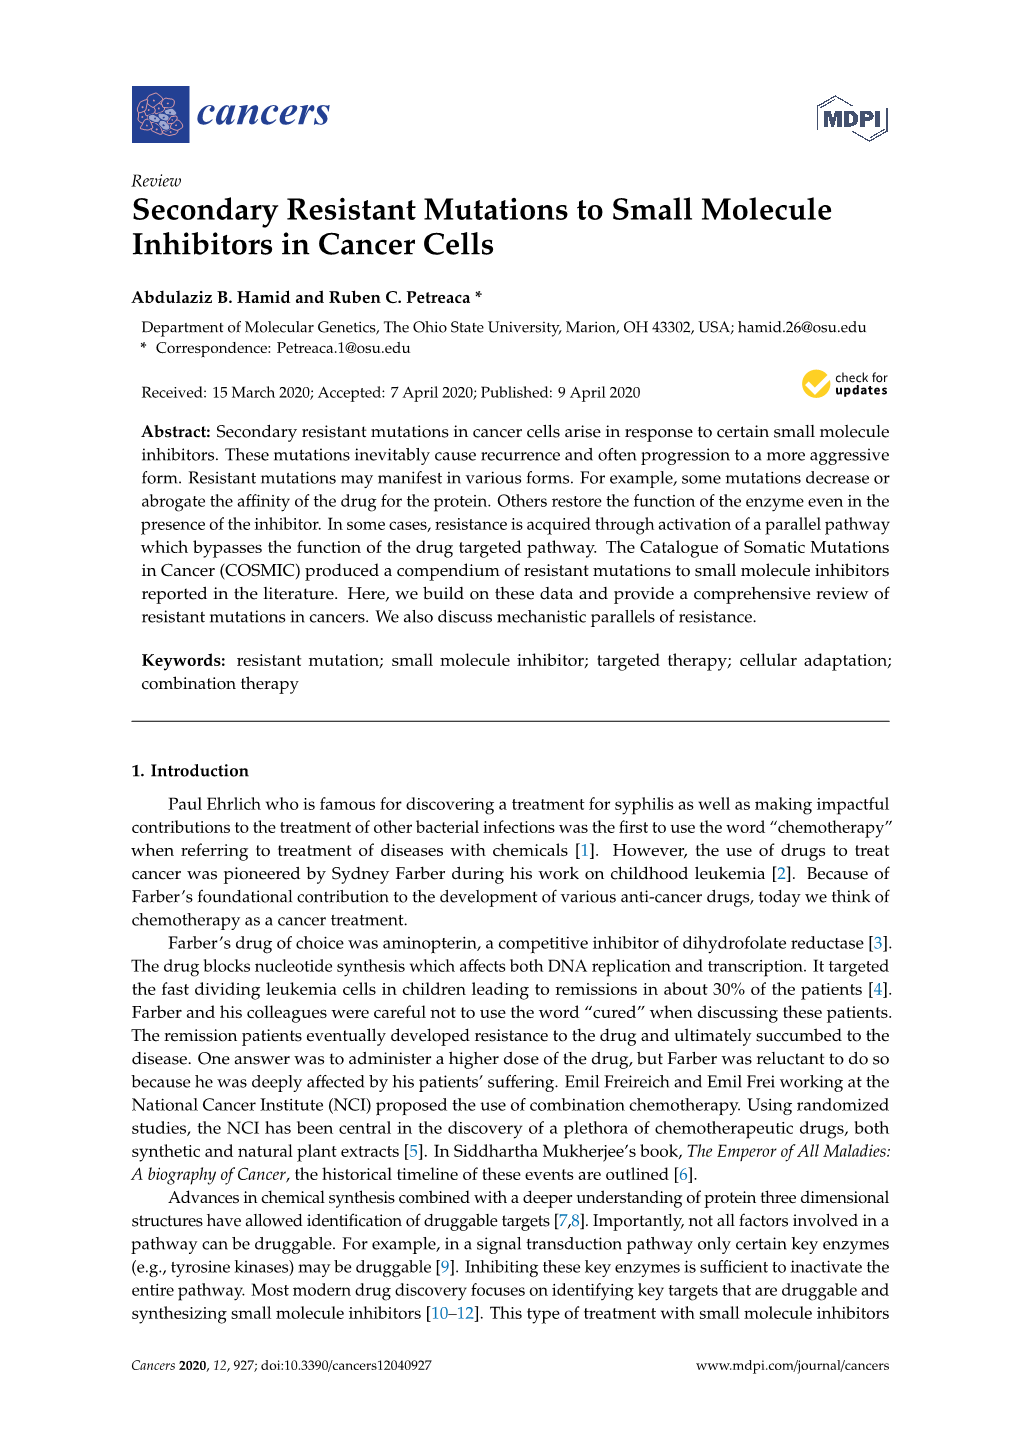 Secondary Resistant Mutations to Small Molecule Inhibitors in Cancer Cells